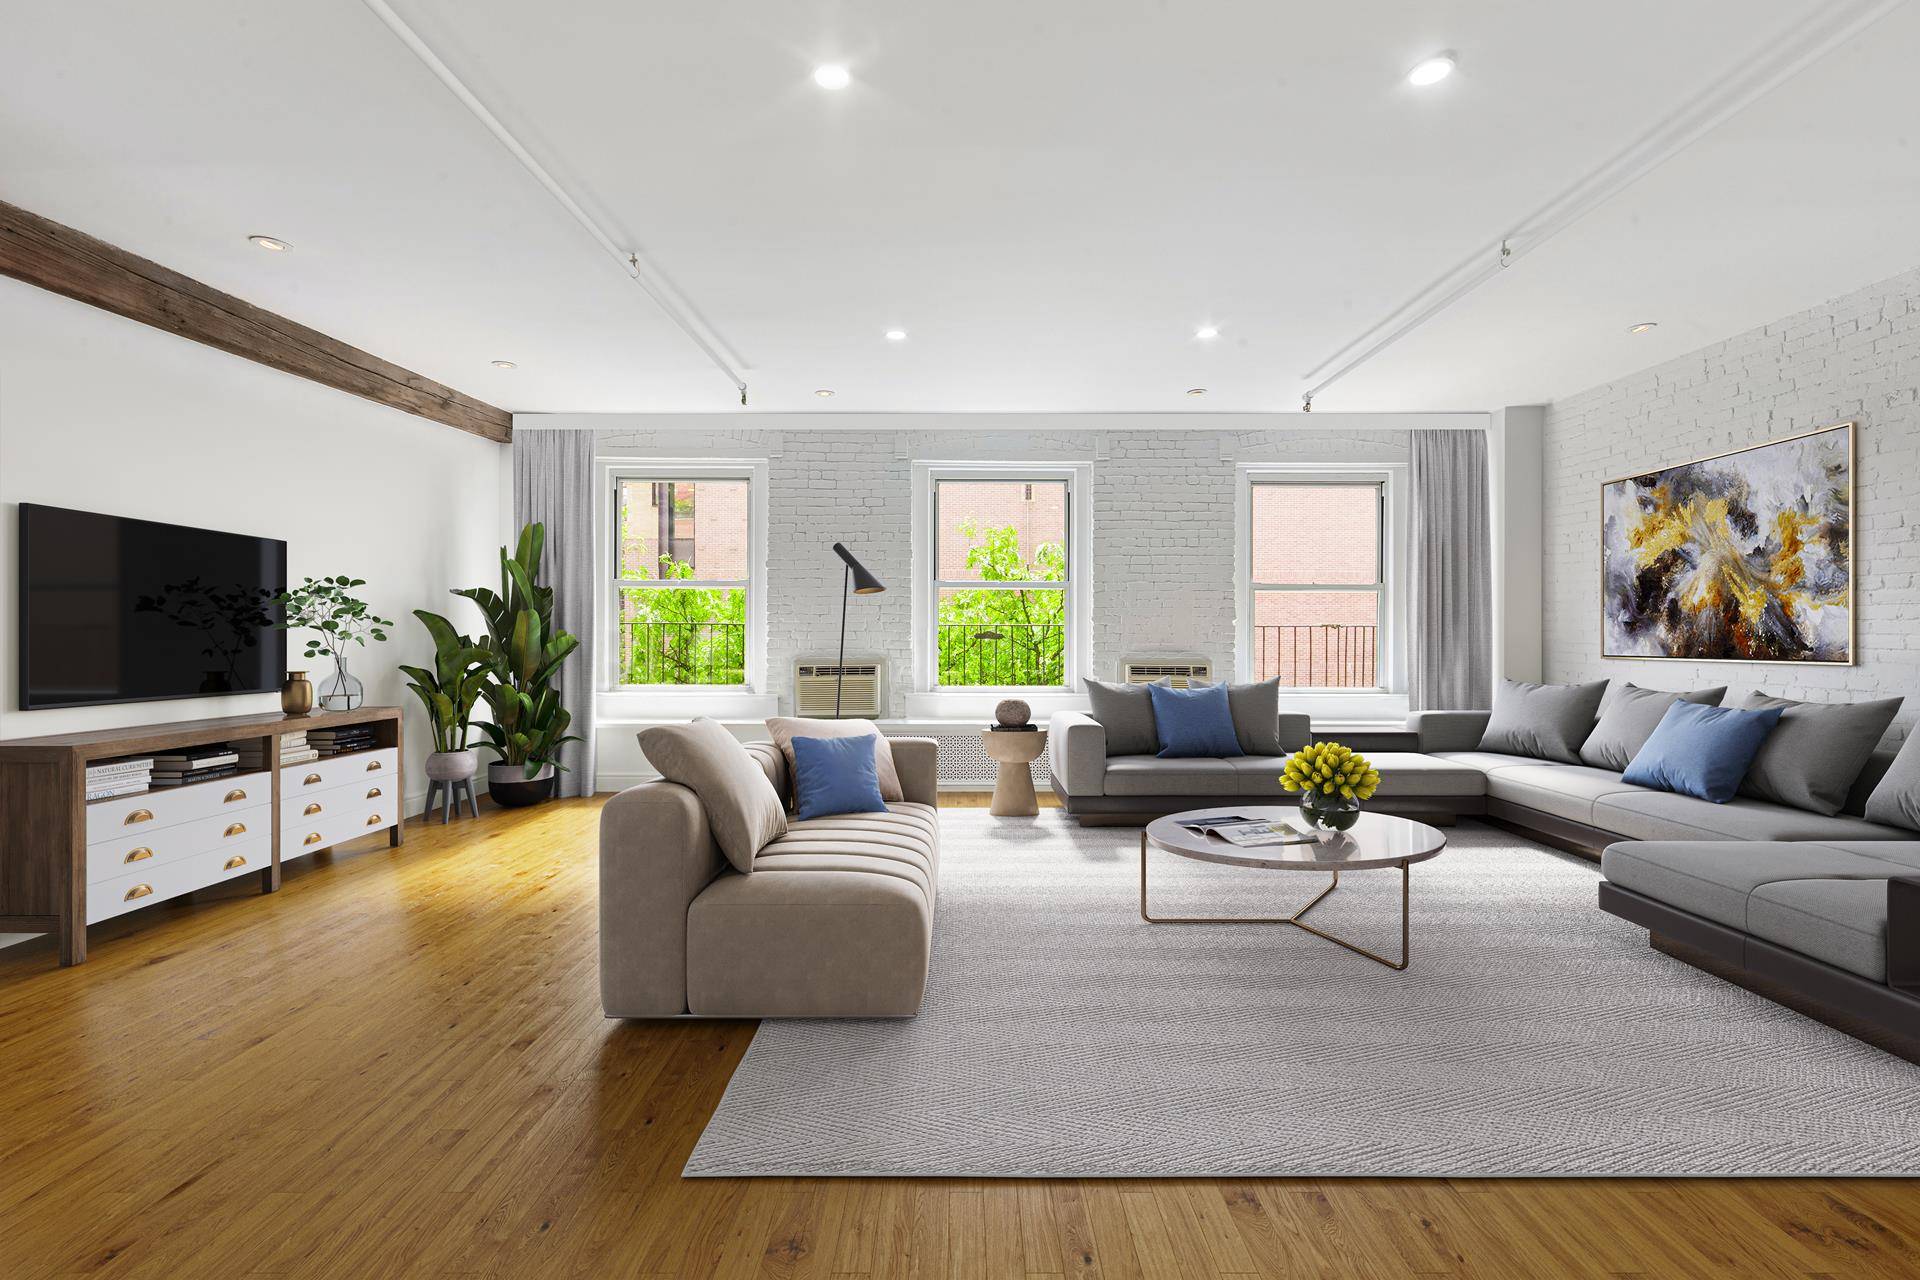 BEST VALUE PER SQ FT. MAKE THIS YOUR DREAM LOFT ON THE UPPER EAST SIDE !